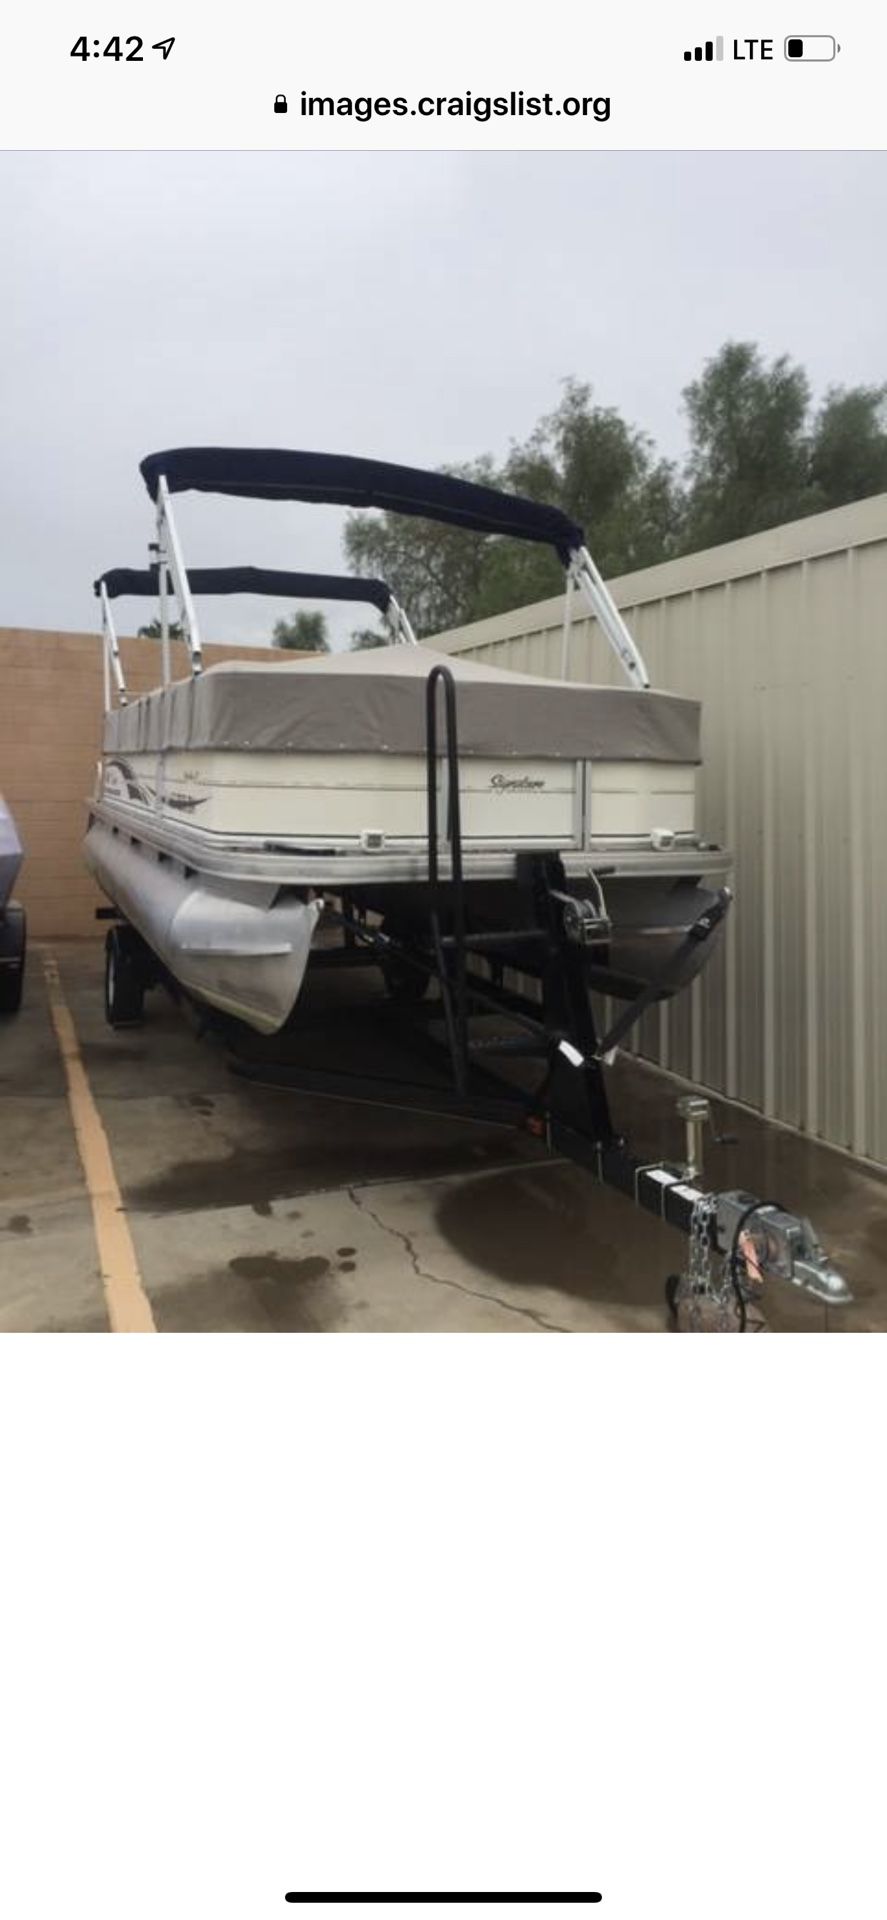 2007 sun tracker party barge 22 60hp motor